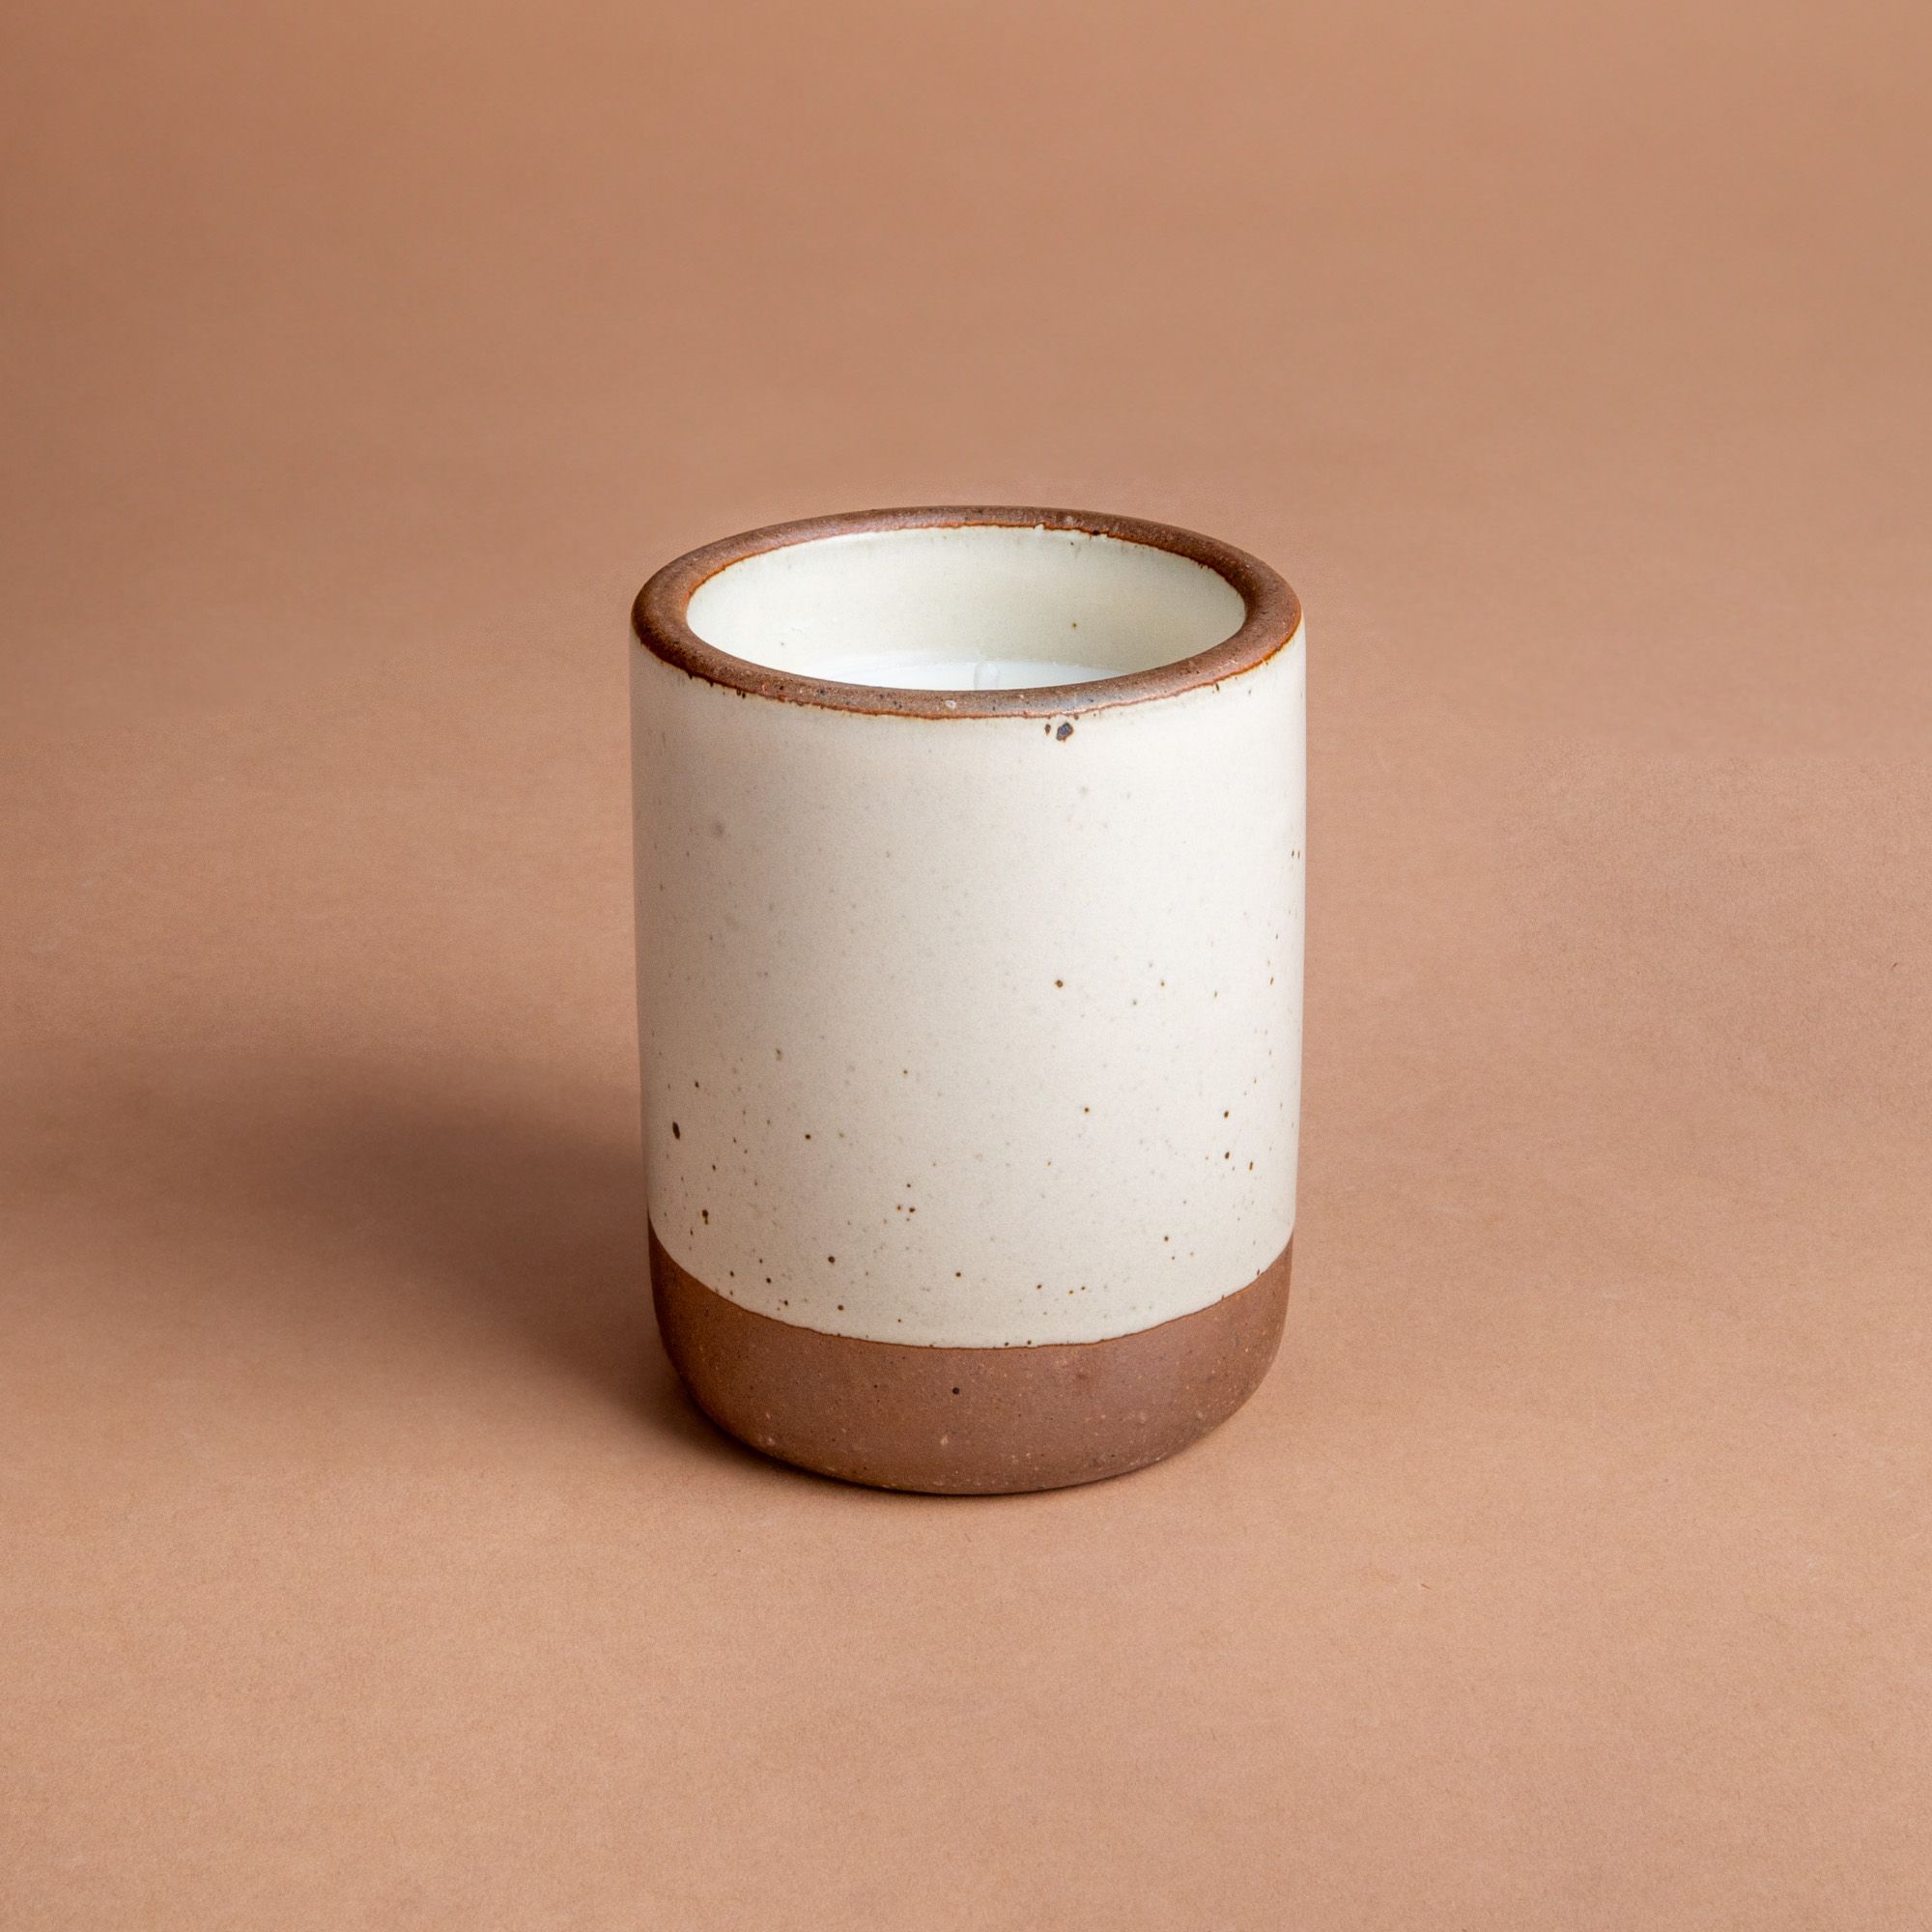 Large ceramic vessel in a warm off-white color with candle inside.